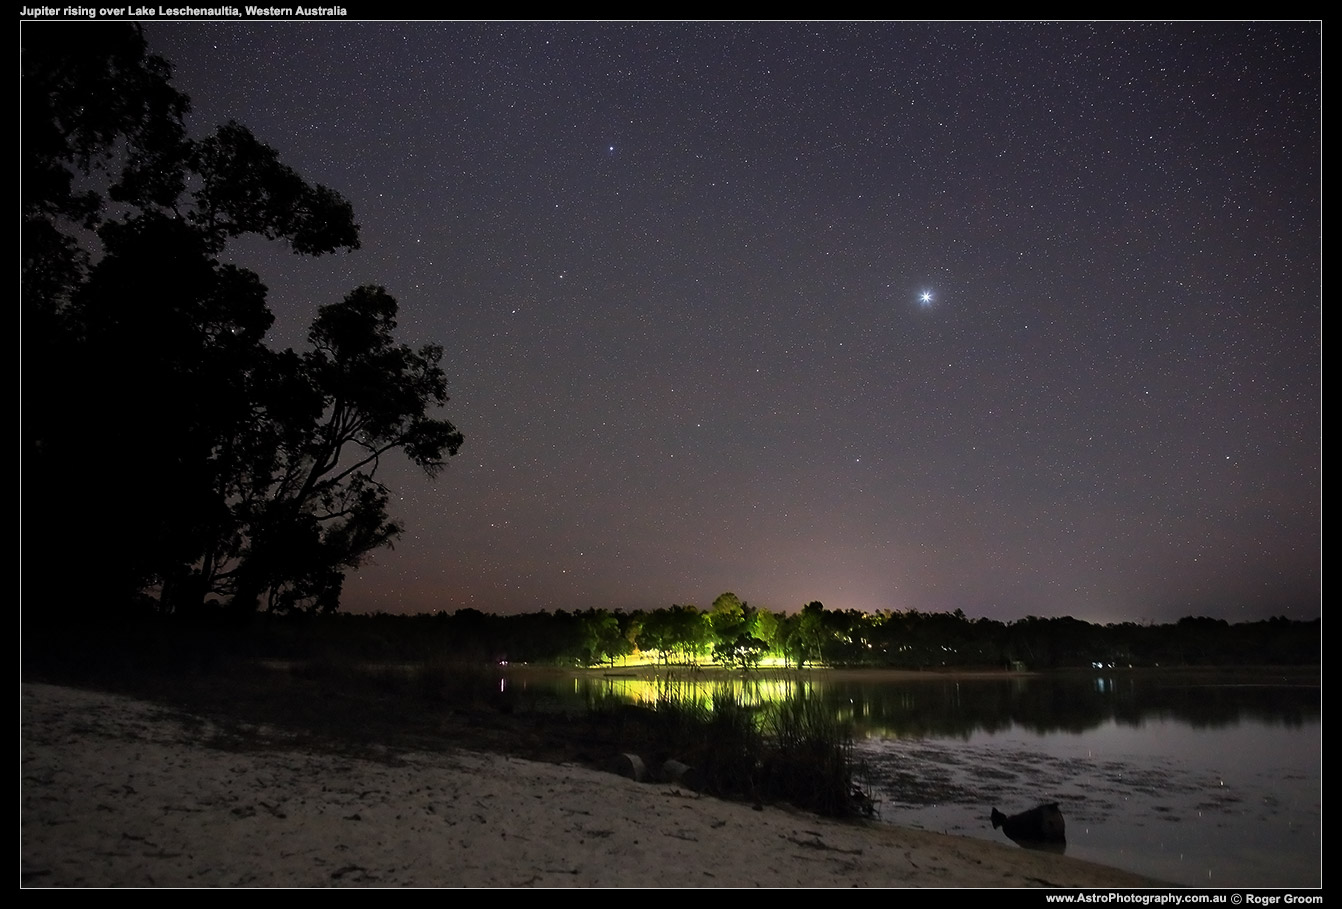 Jupiter rising above the camp and lake at Lake Leschenaultia in Chidlow, Western Australia. February 2016.